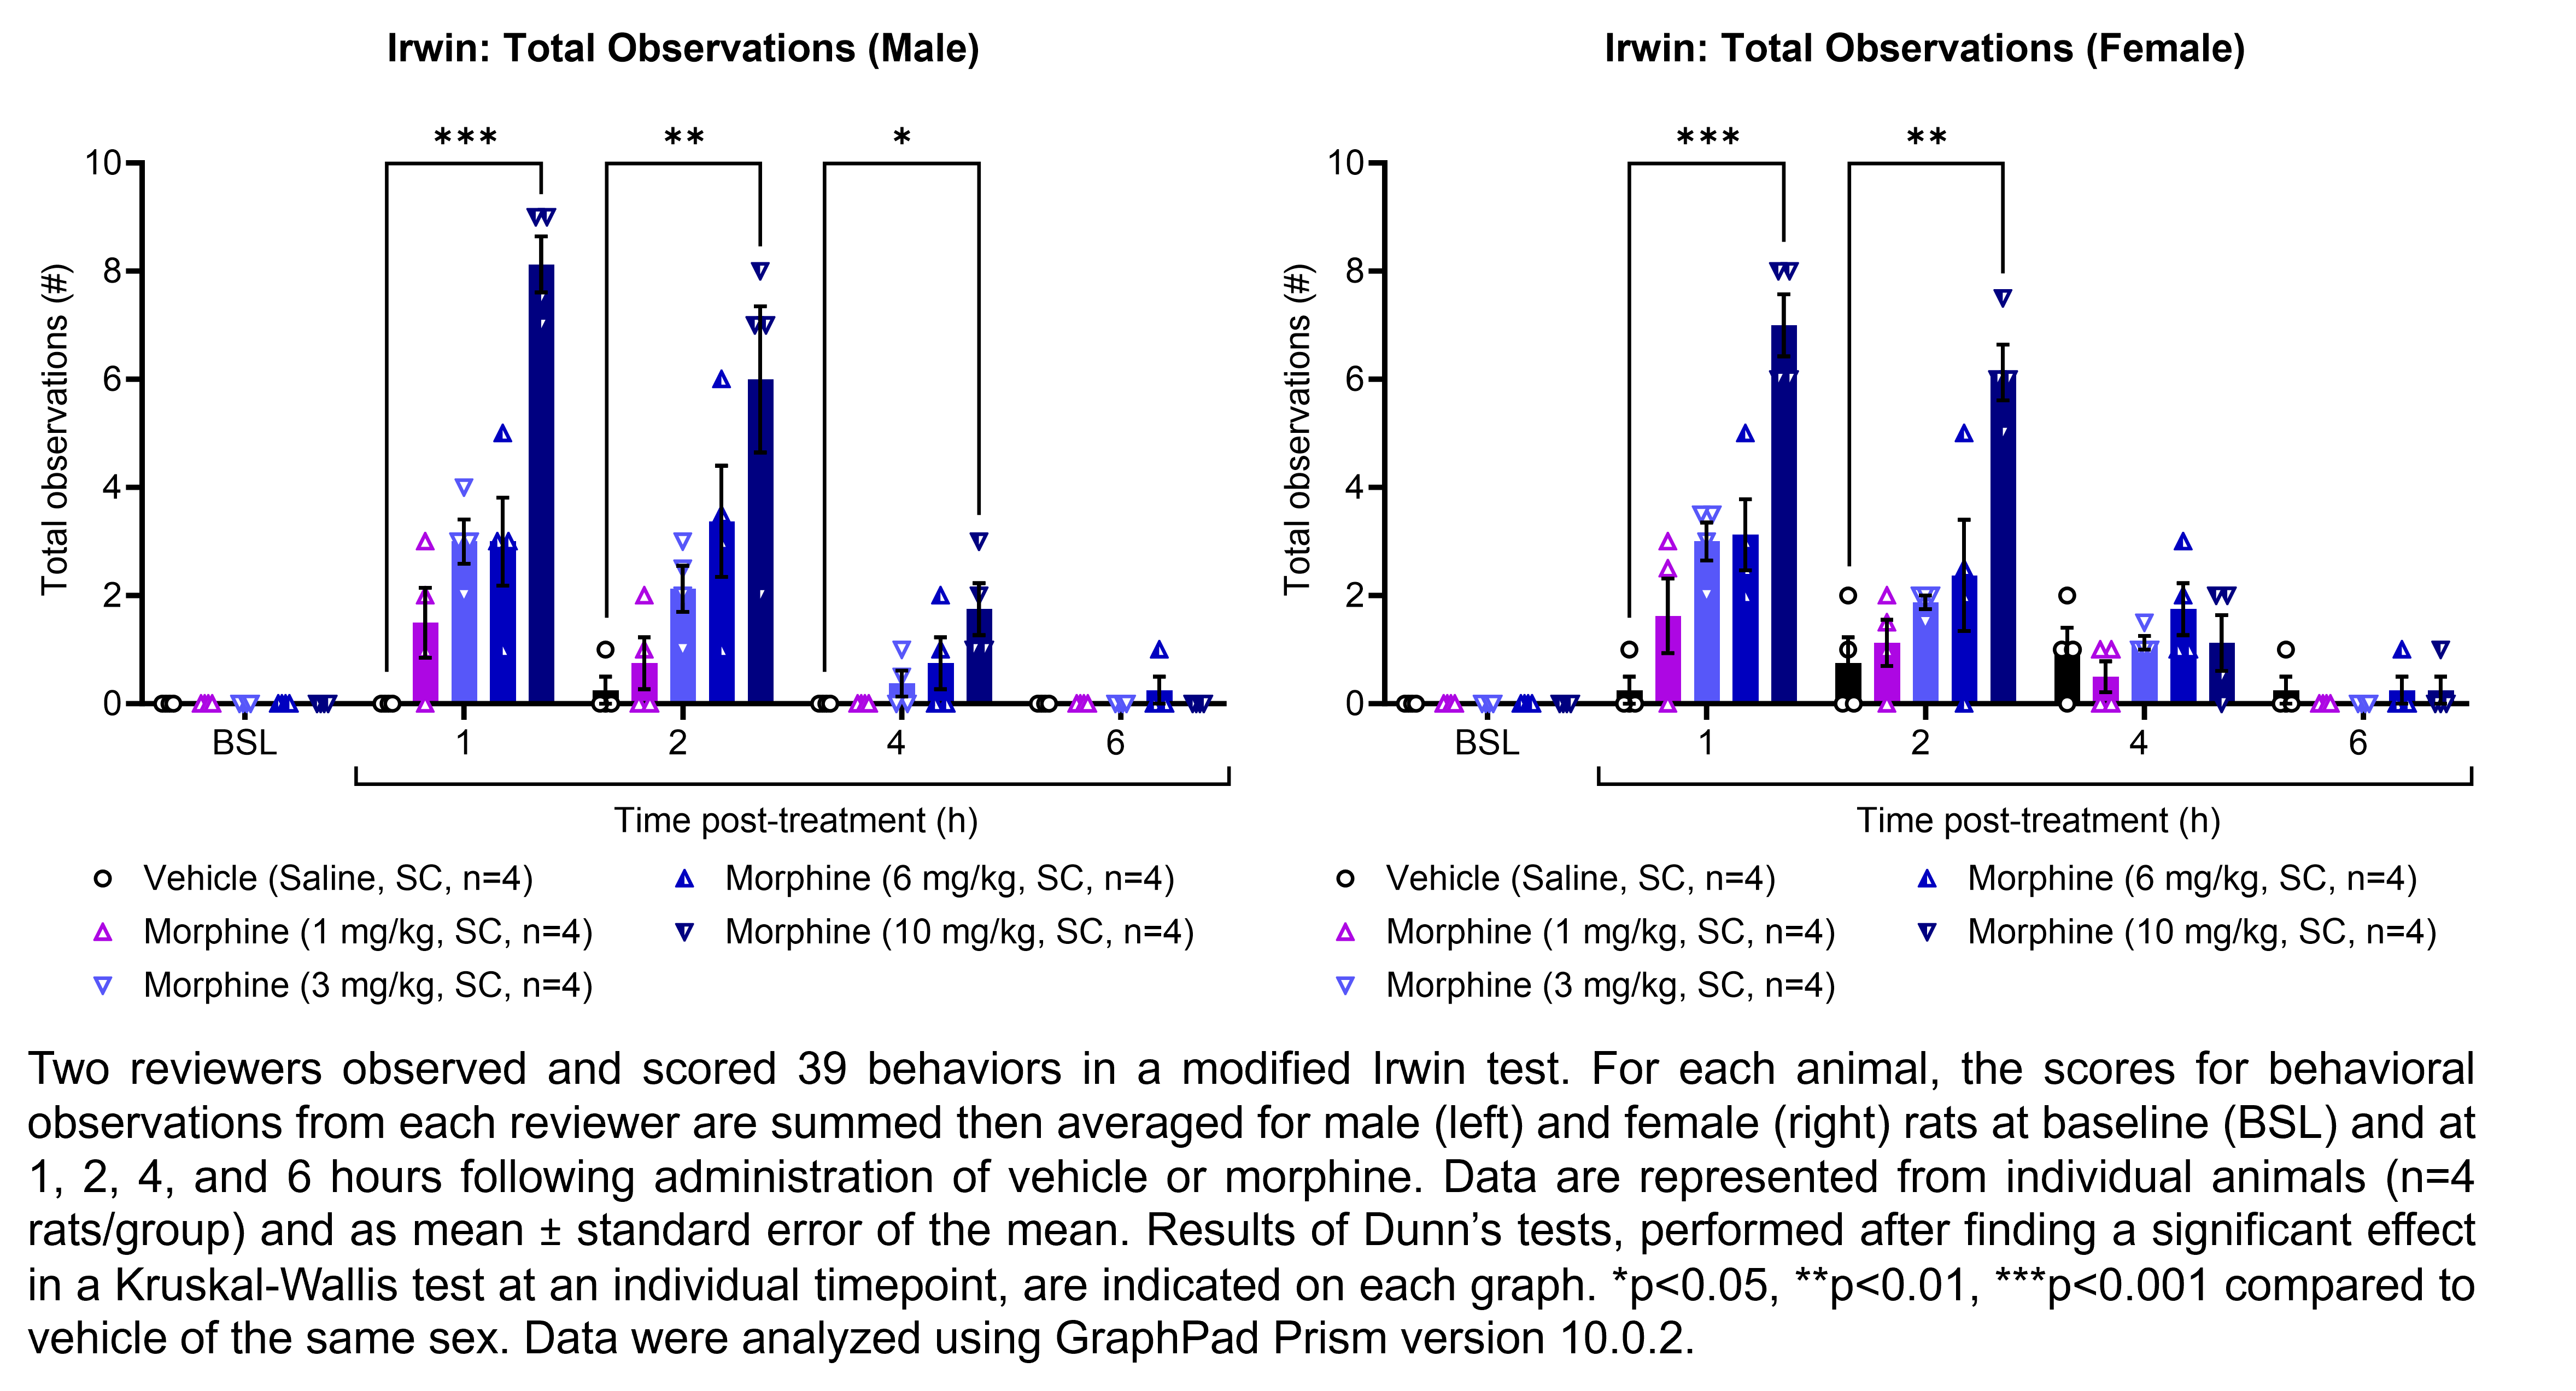 Two reviewers observed and scored 39 behaviors in a modified Irwin test. For each animal, the scores for behavioral observations from each reviewer are summed then averaged for male and female rats (shown on two graphs). Responses are shown at the following time points: baseline (before treatment) and at 1, 2, 4, and 6 hours after treatment with vehicle (saline, delivered SC) or morphine (1, 3, 6, or 10 mg/kg, delivered SC). There were 4 rats per group. Kruskal-Wallis tests were performed at each timepoint for each sex, followed by Dunn’s tests when a significant effect was observed. Dunn’s tests found an increase in the number of observations relative to vehicle in males at 1 hour, 2 hours, and 4 hours post-treatment with 10 mg/kg morphine (p<0.001, 0.01, 0.05, respectively). Dunn’s tests found an increase in the number of observations relative to vehicle in females at 1 hour post-treatment with 10 mg/kg morphine (p<0.001) and at 2 hours post-treatment with 10 mg/kg morphine (p<0.01). Data were analyzed using GraphPad Prism version 10.0.2